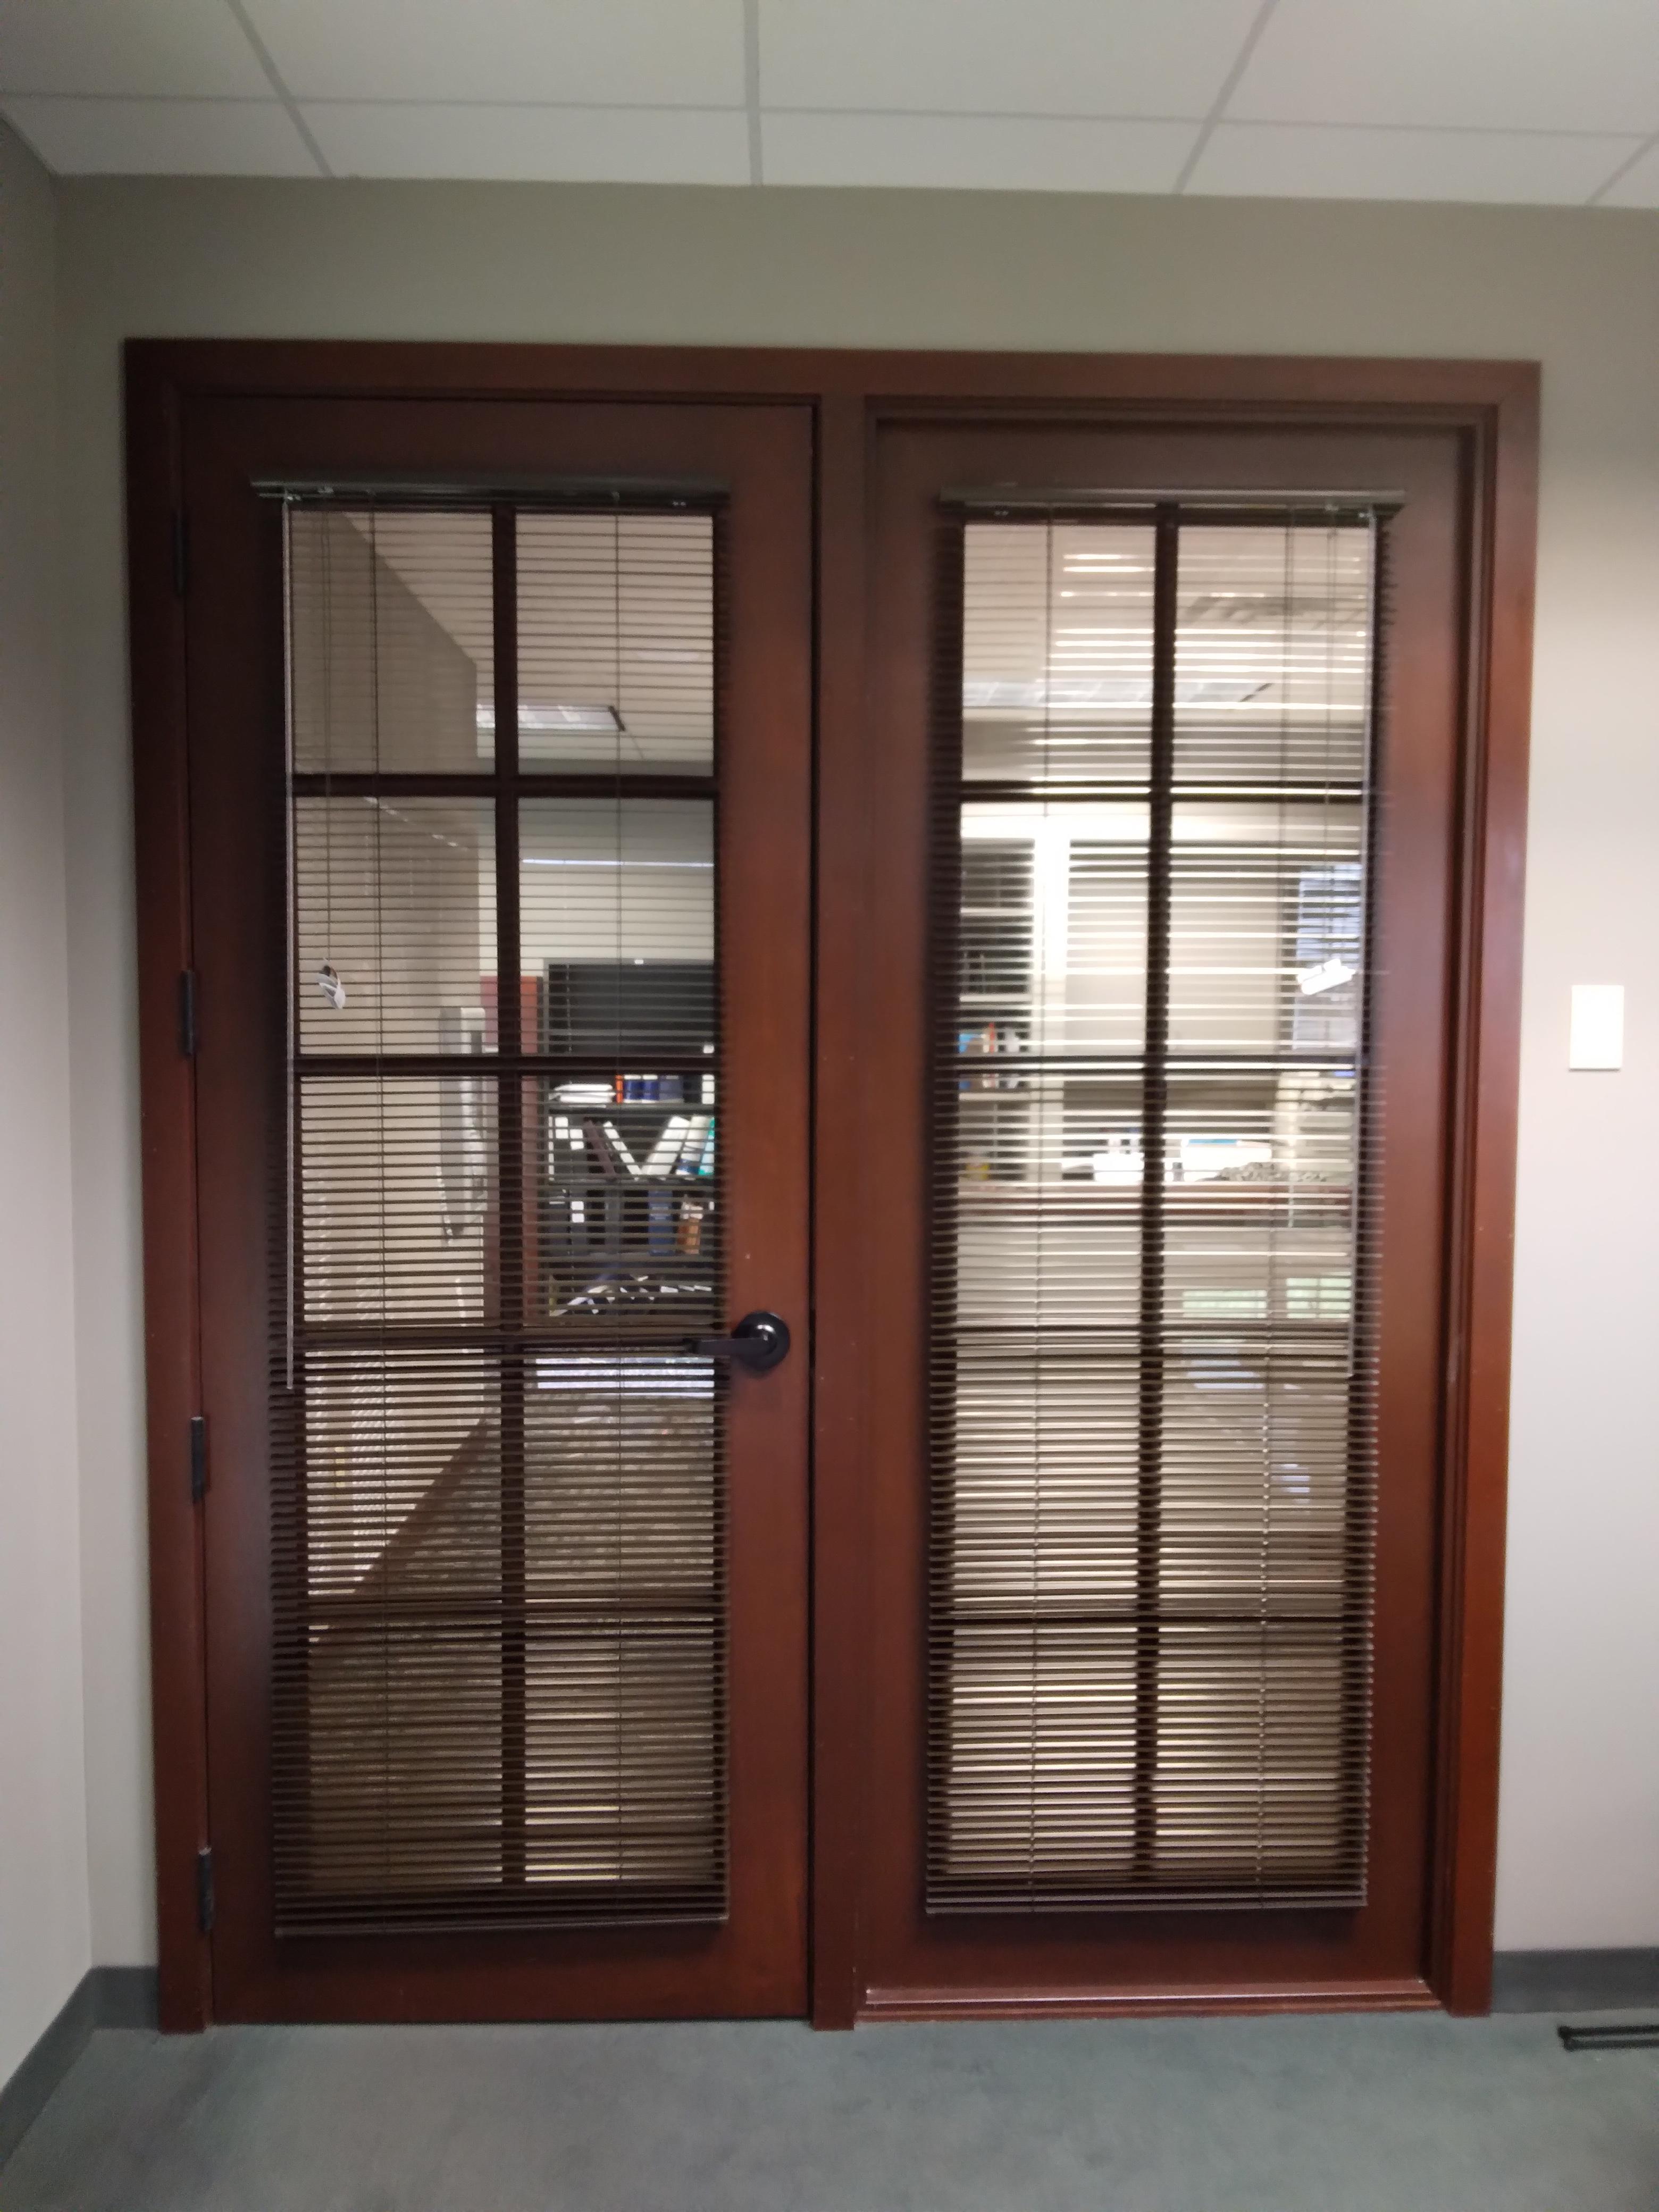 These aluminum mini blinds were added to these Springfield Illinois office doors to provide privacy in the office.  BudgetBlinds  WindowCoverings  Blinds  AluminumBlinds  SpringfieldIllinois